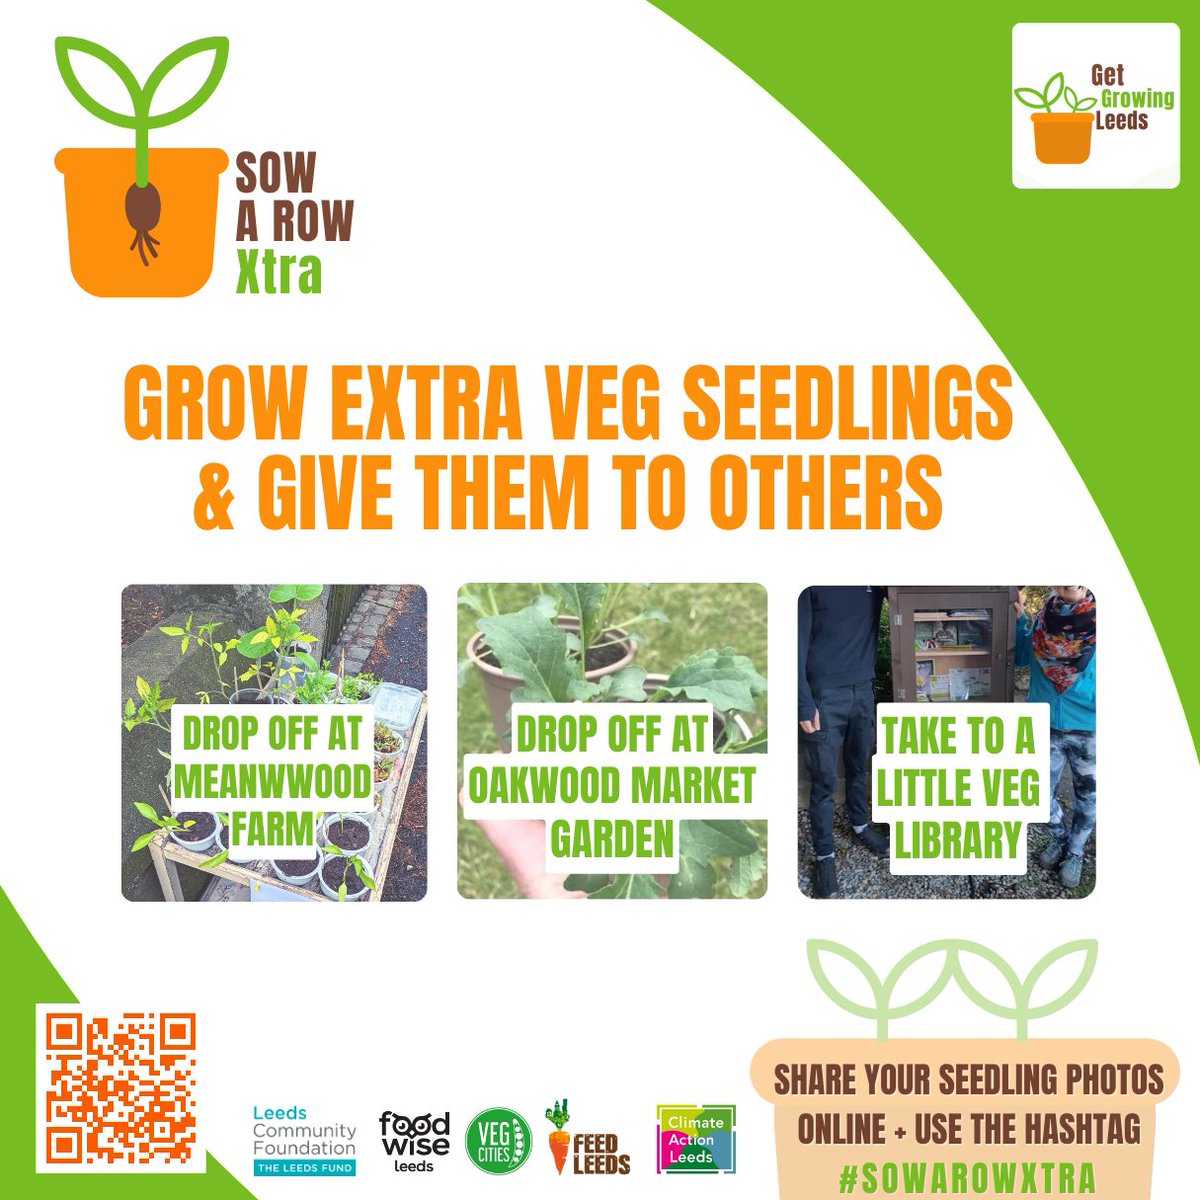 Join in #SowARowXtra
grow extra veg and give to others.
We want to get more people growing in #Leeds!
Do you grow veg from seed? If so, you can help others with your know-how!
For more details visit: feedleeds.org/sowx/ 
You have 3 options of places to share. #GetGrowingLeeds